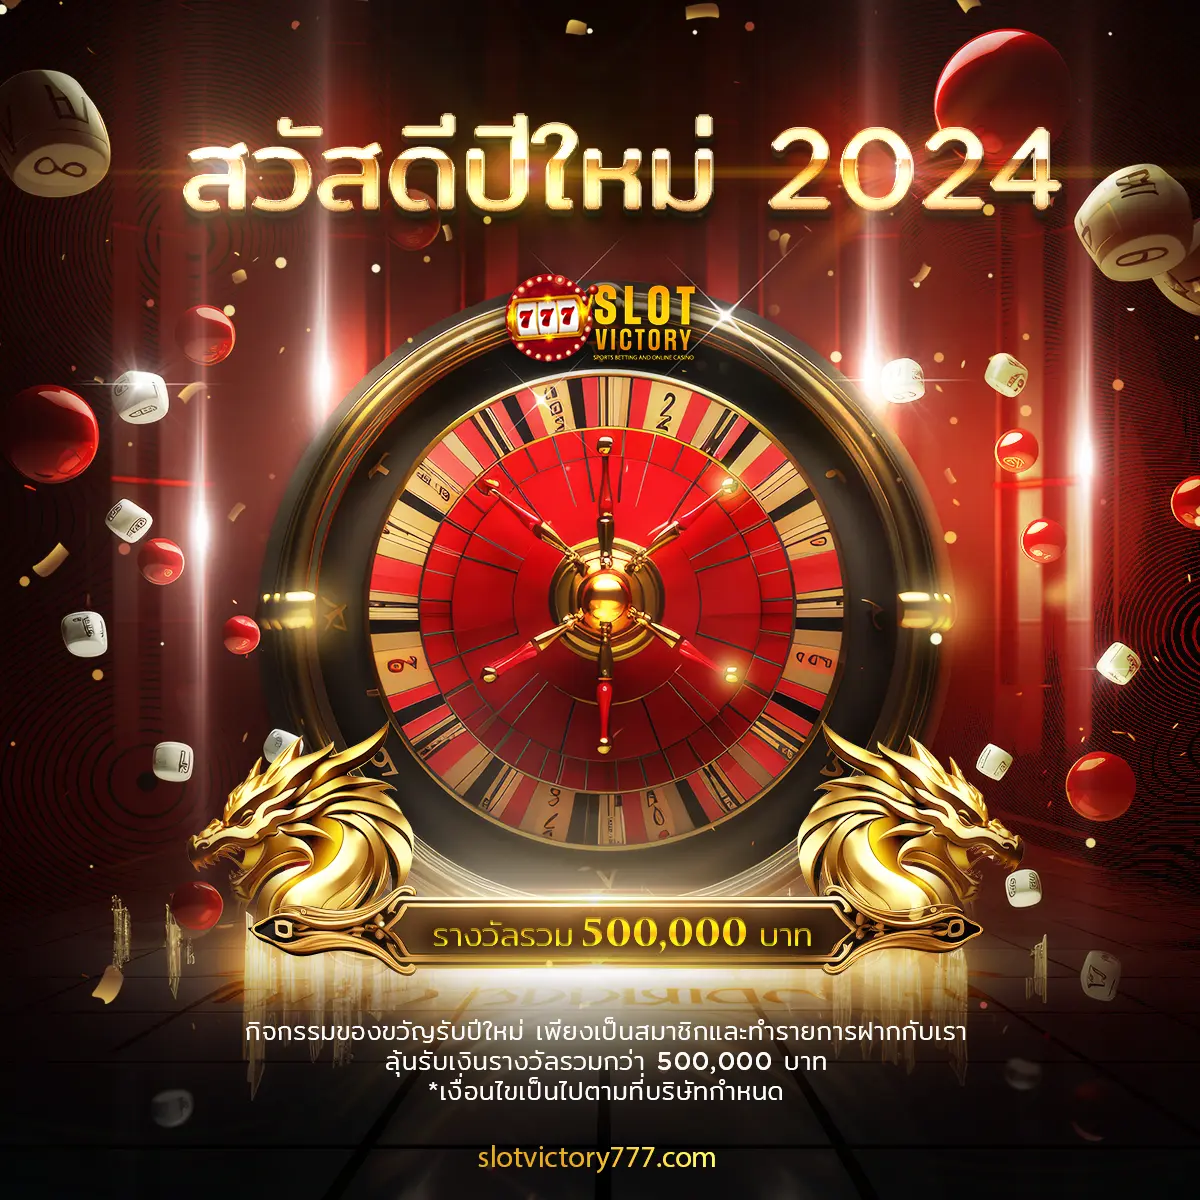 new year 2024 slotvictory